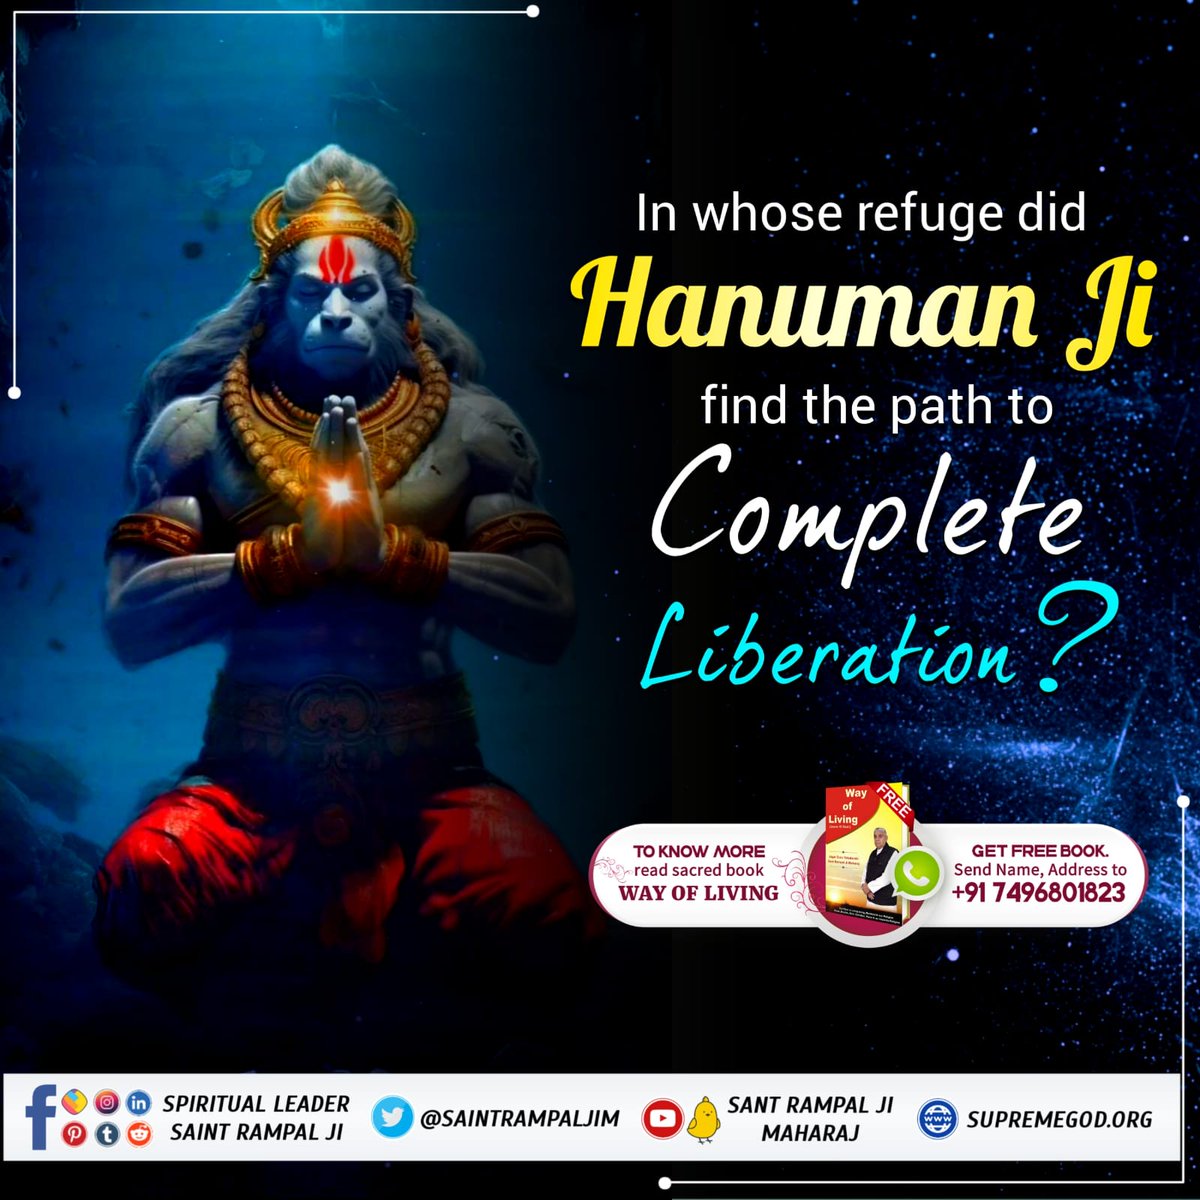 #अयोध्यासे_जानेकेबाद_हनुमानको मिले पूर्ण परमात्मा🙏🙏 There are 12 chapters on page 113 of the holy Kabir Sagar. Hanuman Bodh is the episode of this chapter of taking refuge in Pawansut Hanuman ji by the Supreme God. To know the complete story of, you must read 'Jine Ki Rah' book